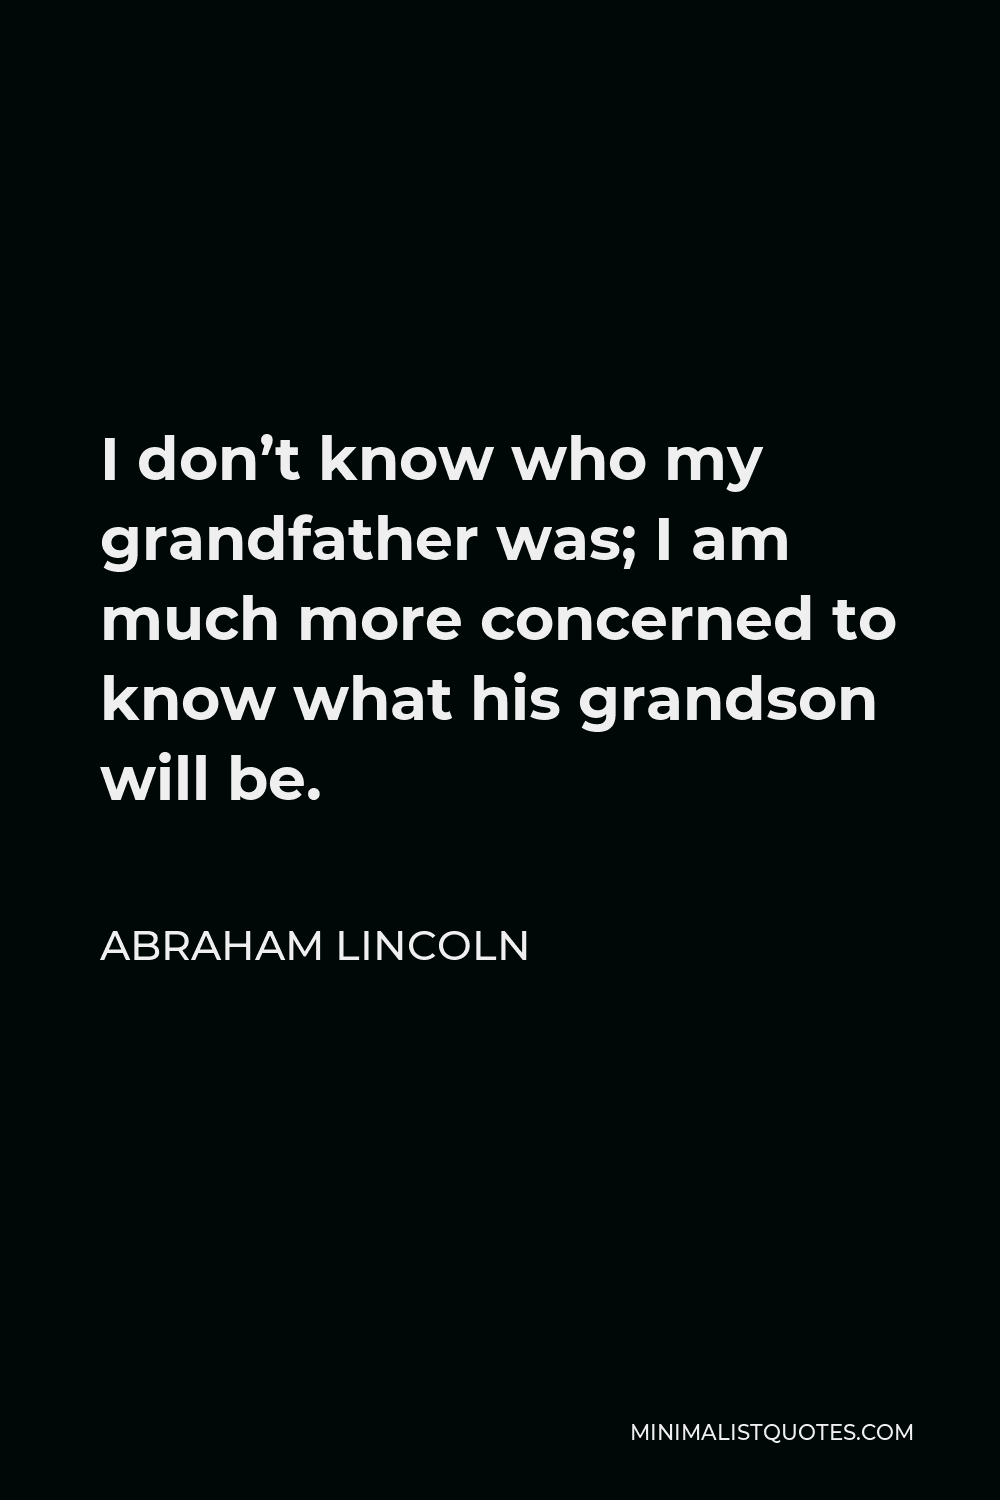 Abraham Lincoln Quote - I don’t know who my grandfather was; I am much more concerned to know what his grandson will be.